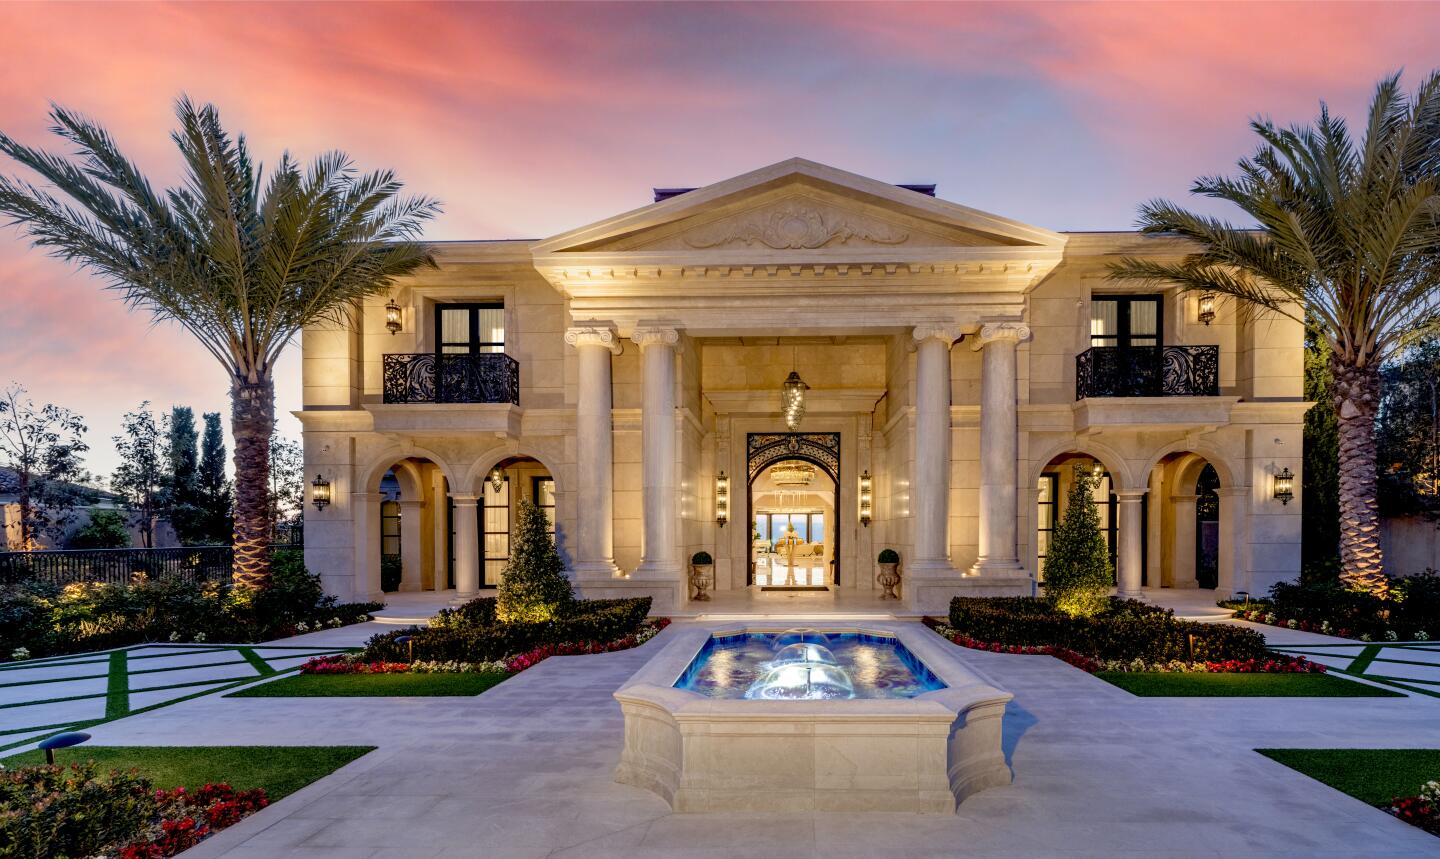 Built in 2021, the 15,500-square-foot palace features ostentatious amenities and hardware coated in 24-karat gold.